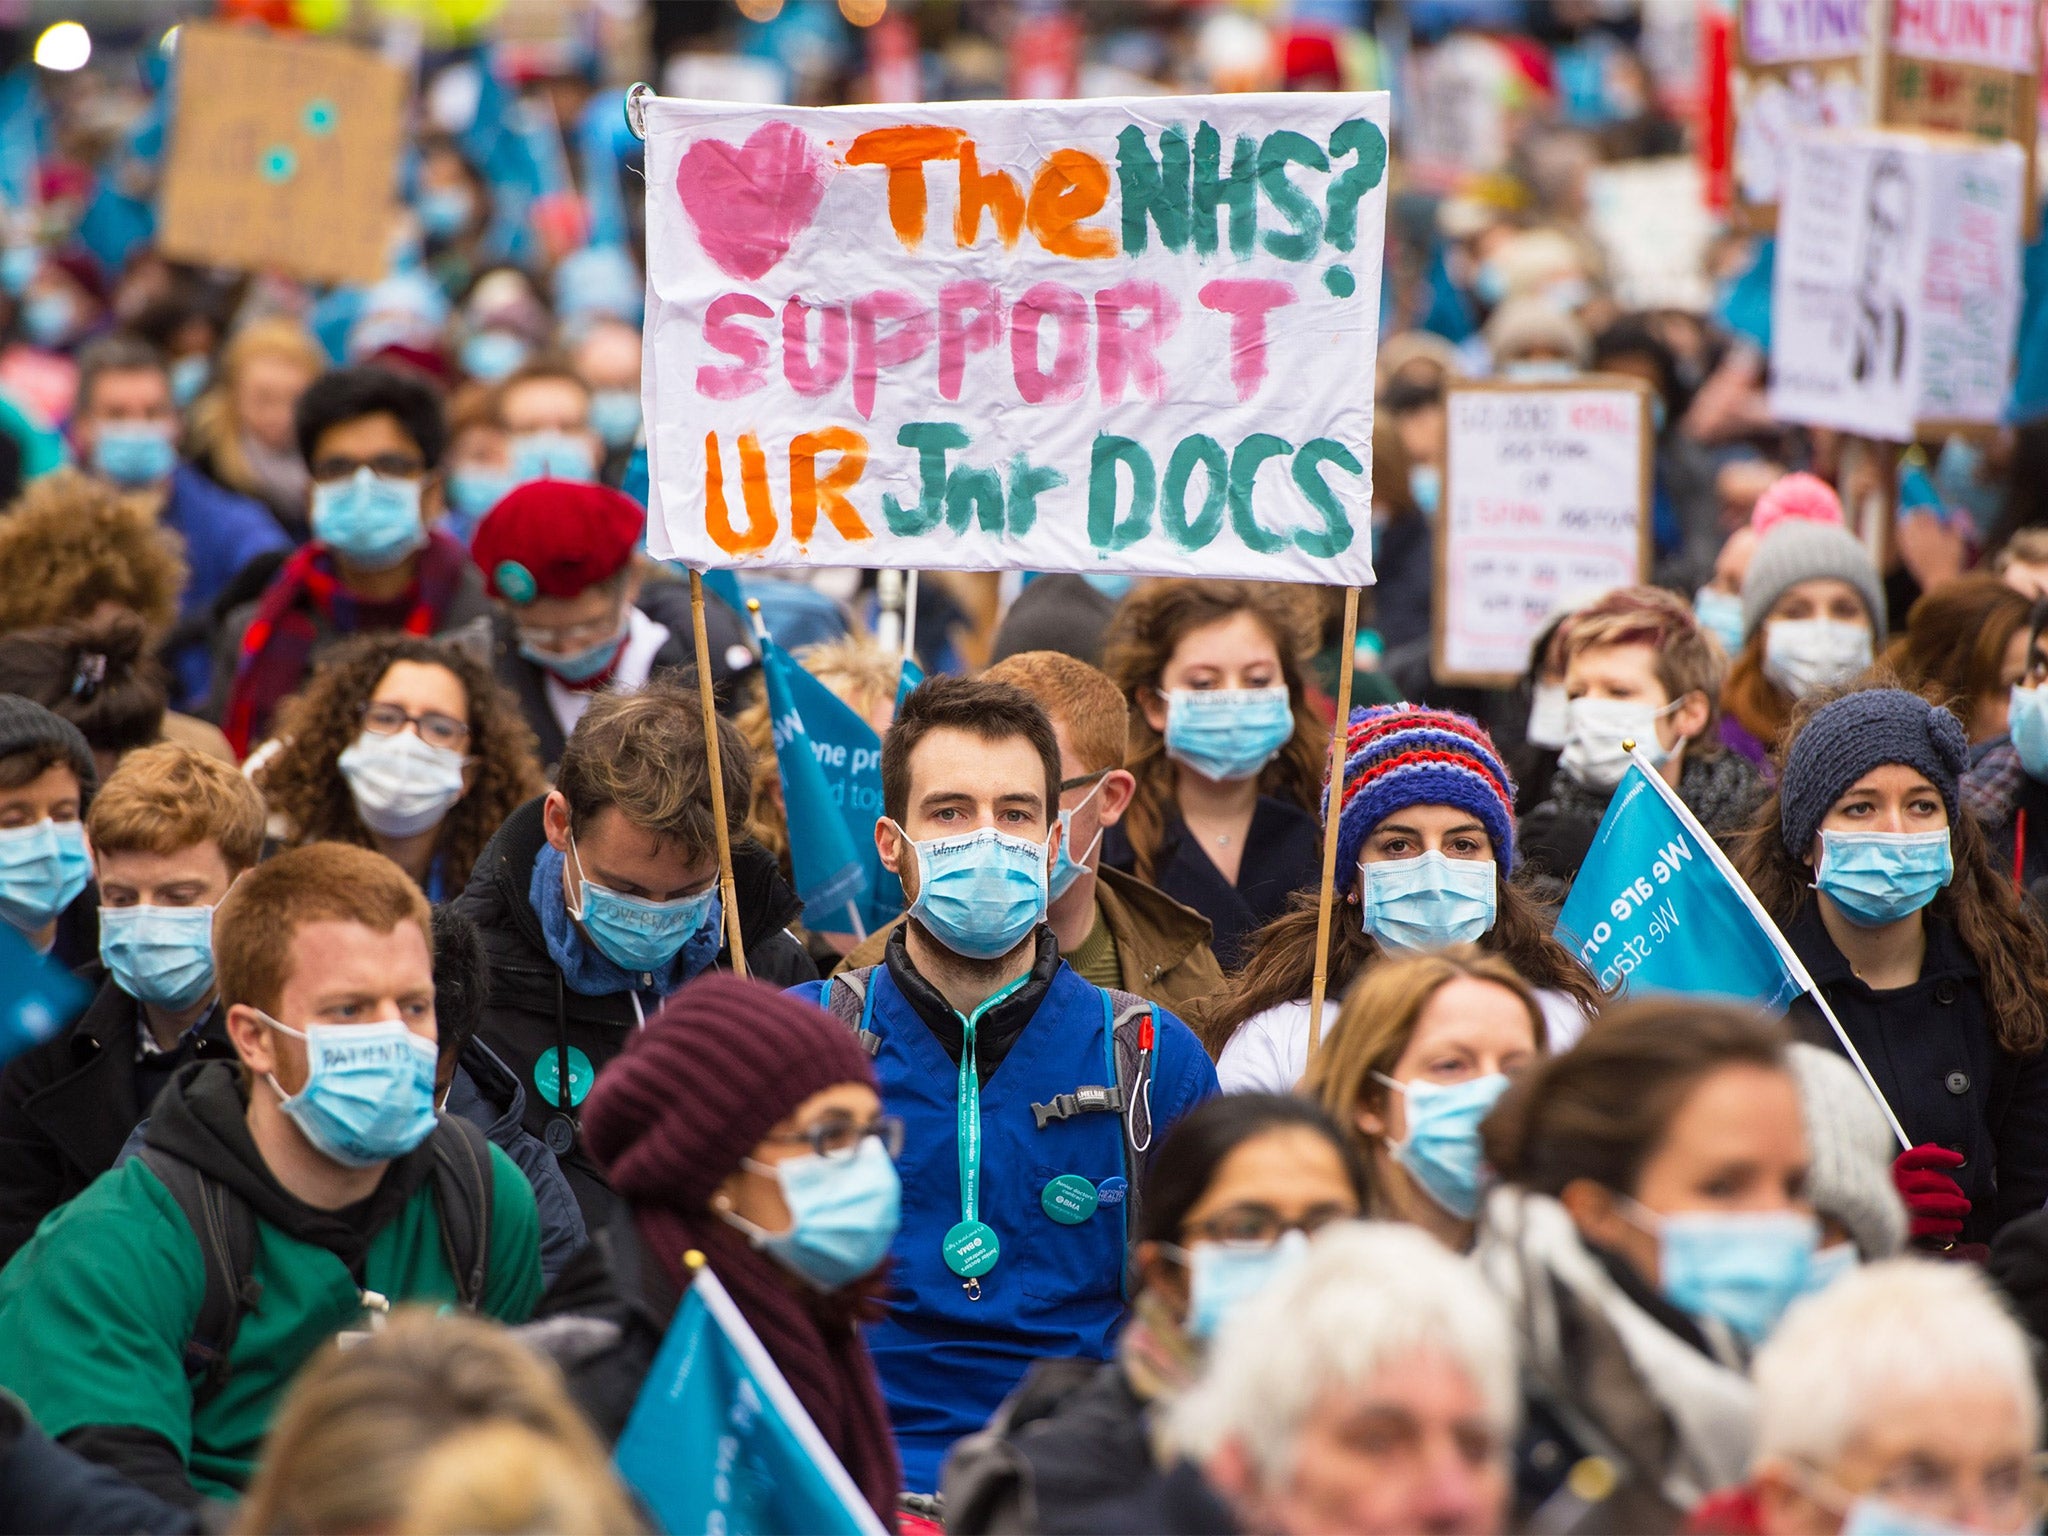 Junior doctors have warned they will not work in a system that puts patient safety at risk